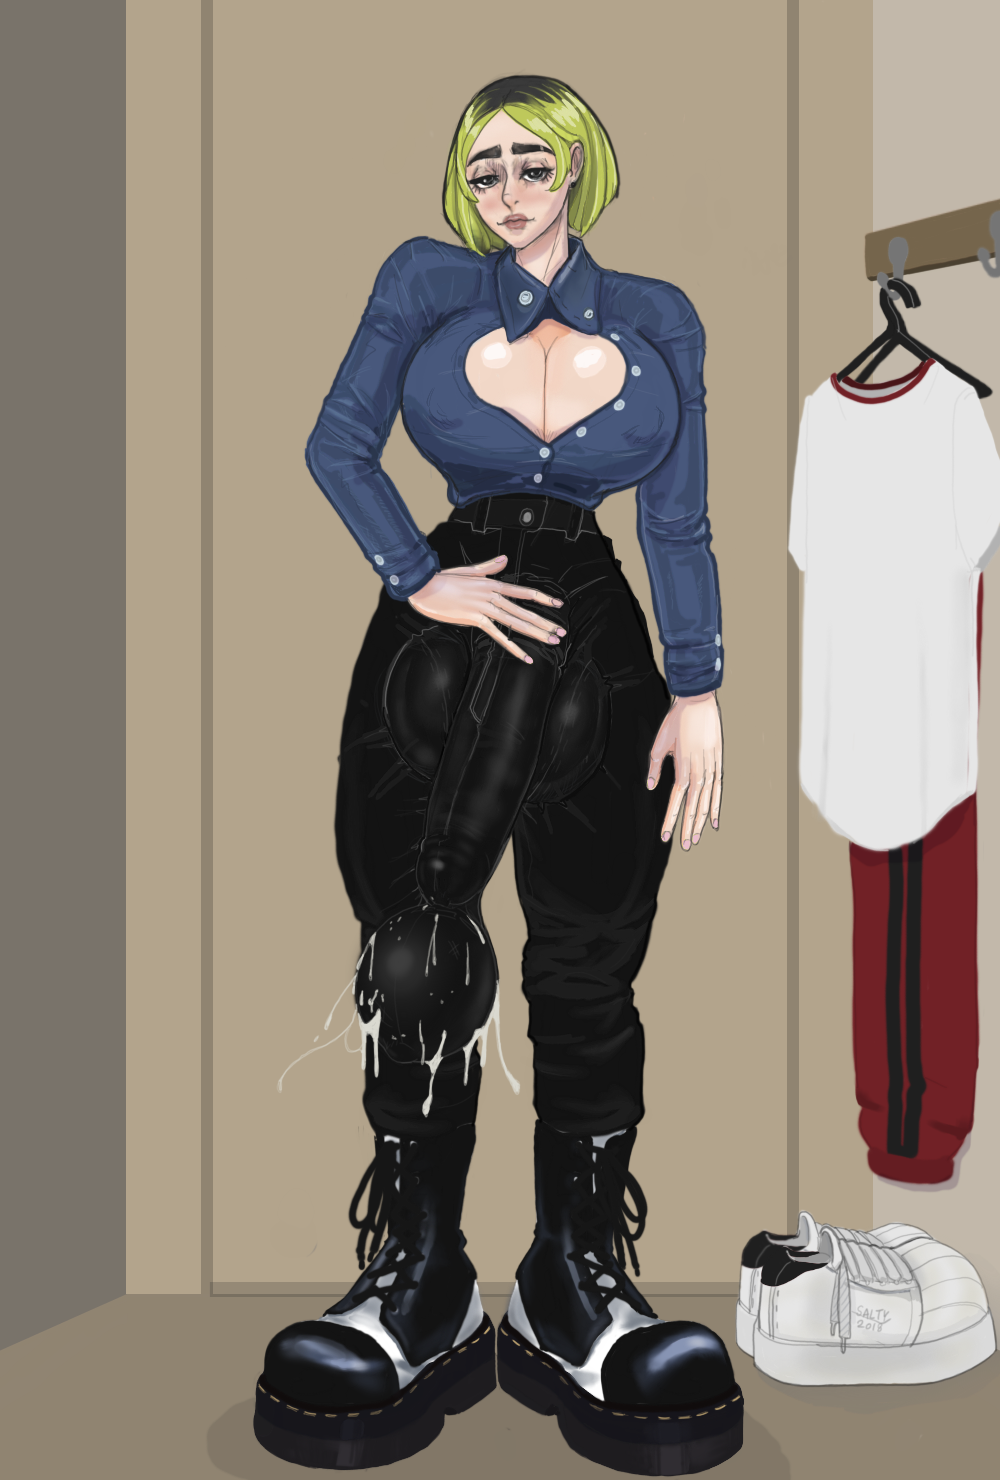 saltysopresa-blog: Casual Ofidia  Ofidia out of her exosuit. Trying on some clothes